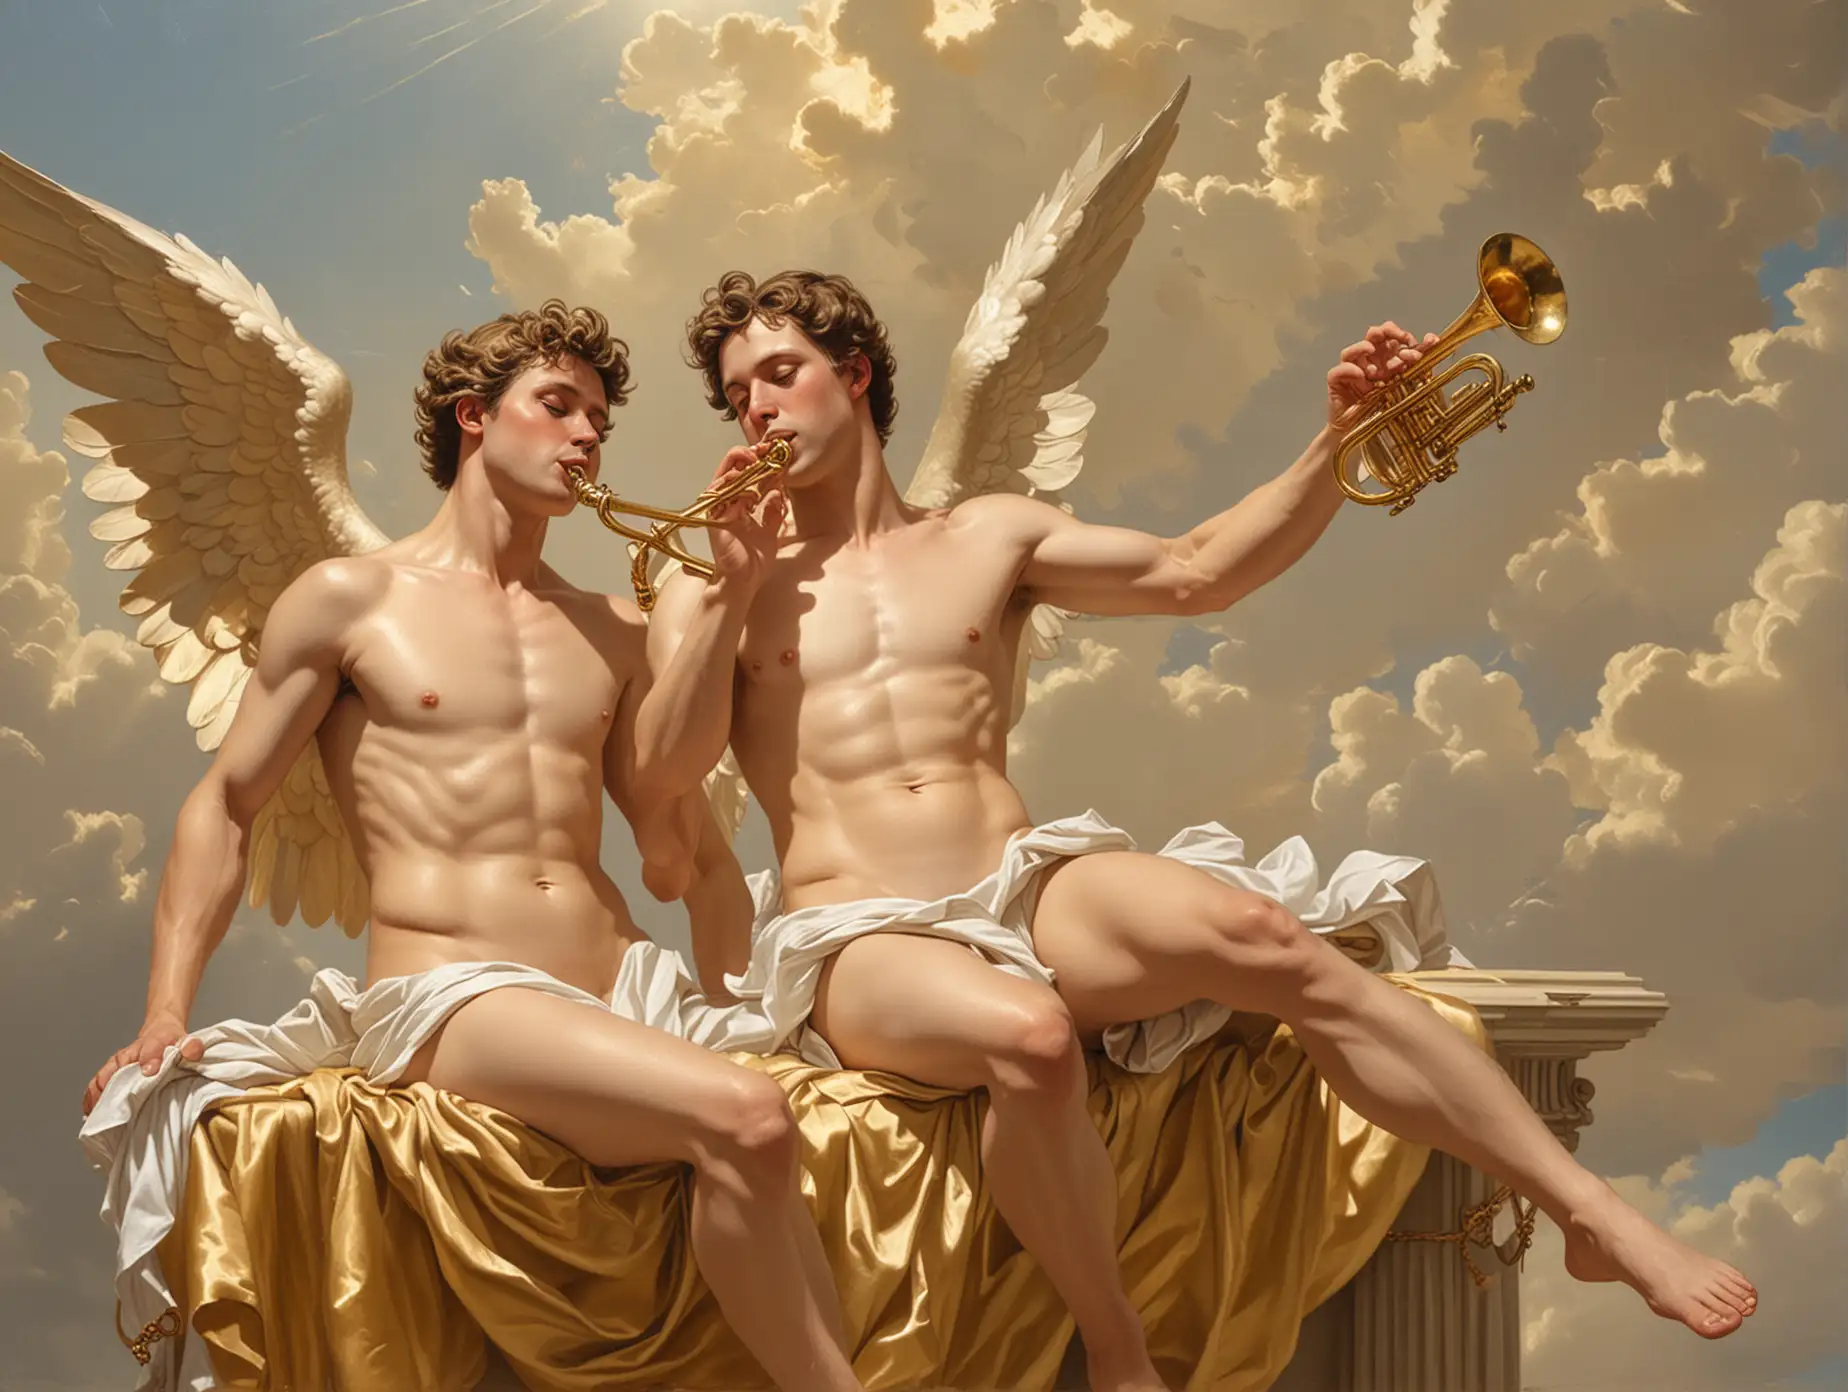 Two Nude Male Angels Playing Trumpet in Sunlit Sky